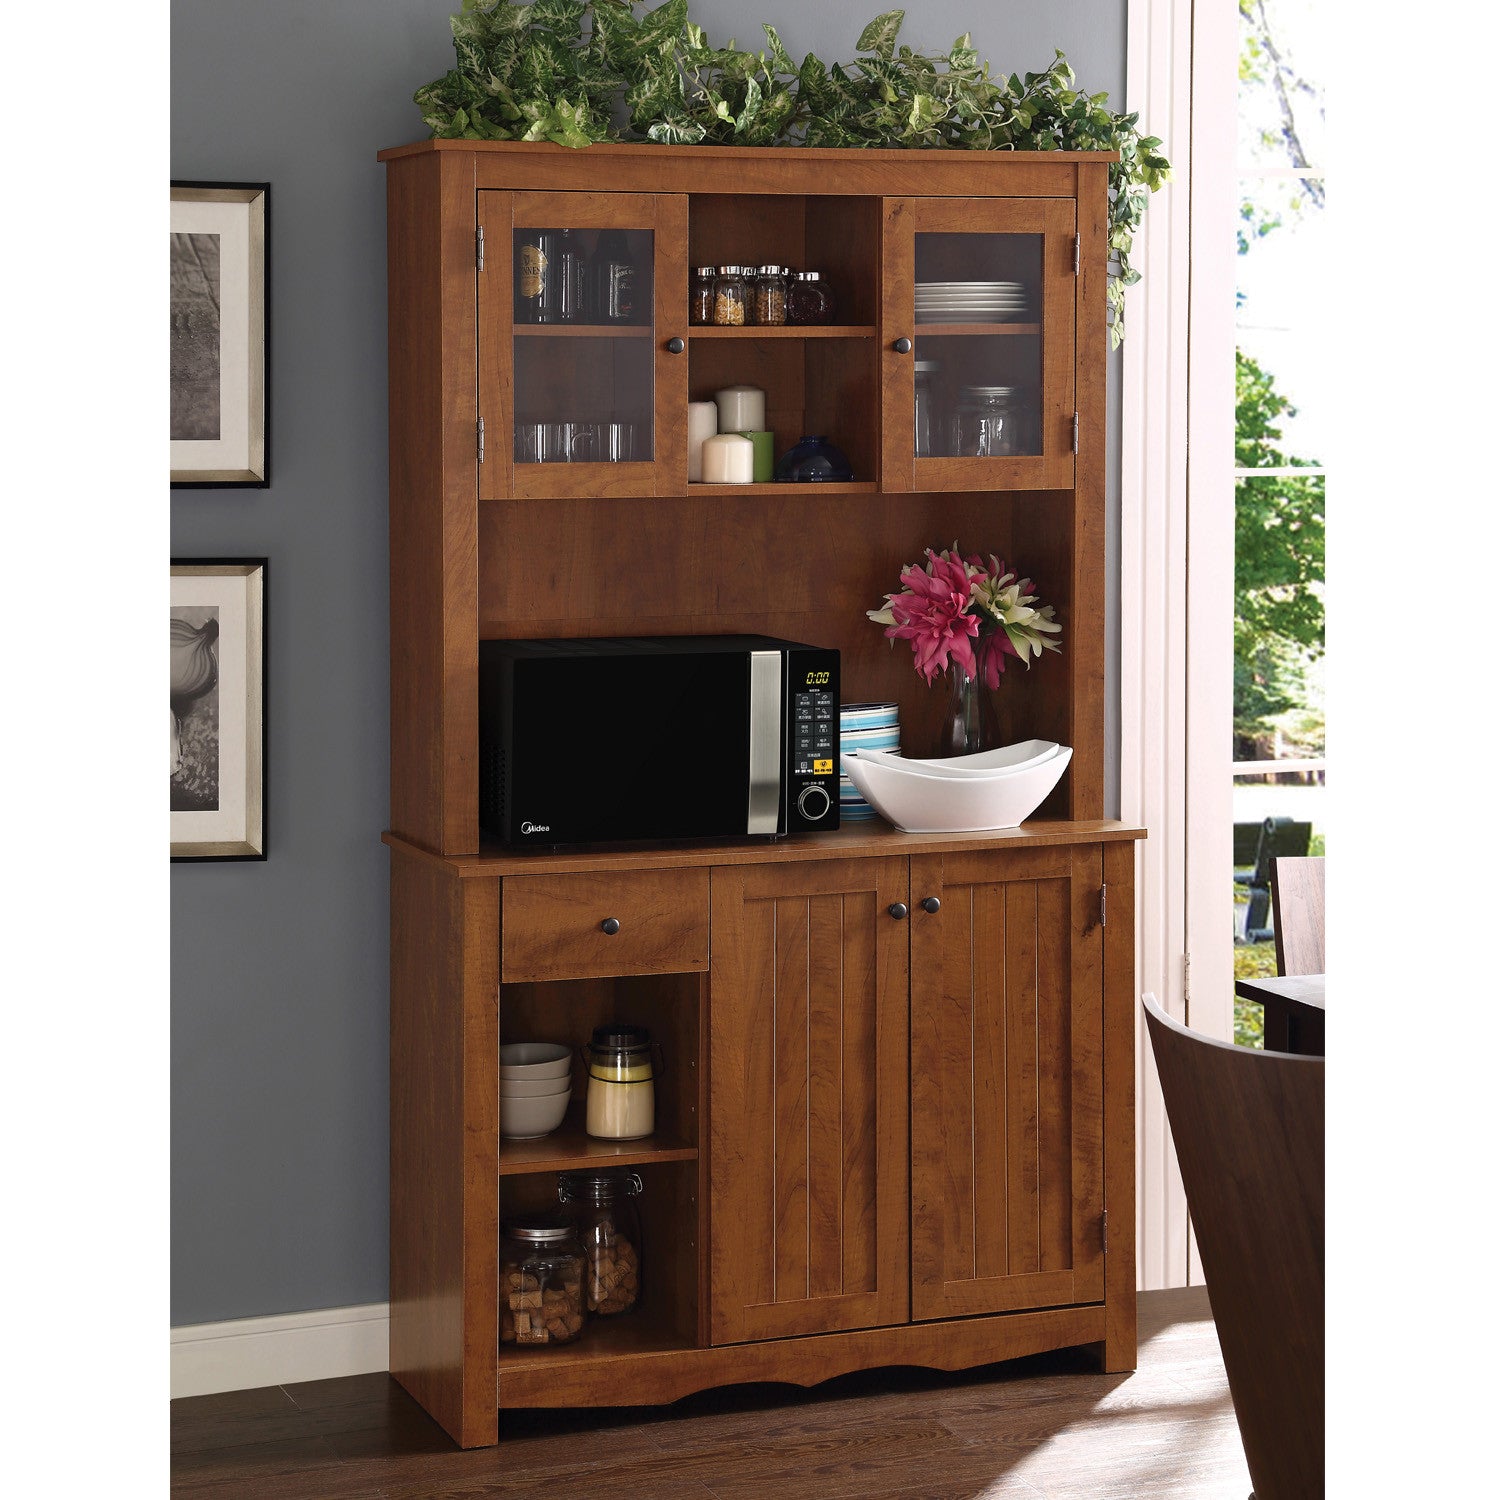 Chaina Cabinet Kitchen Storage With Microwave By Home Source